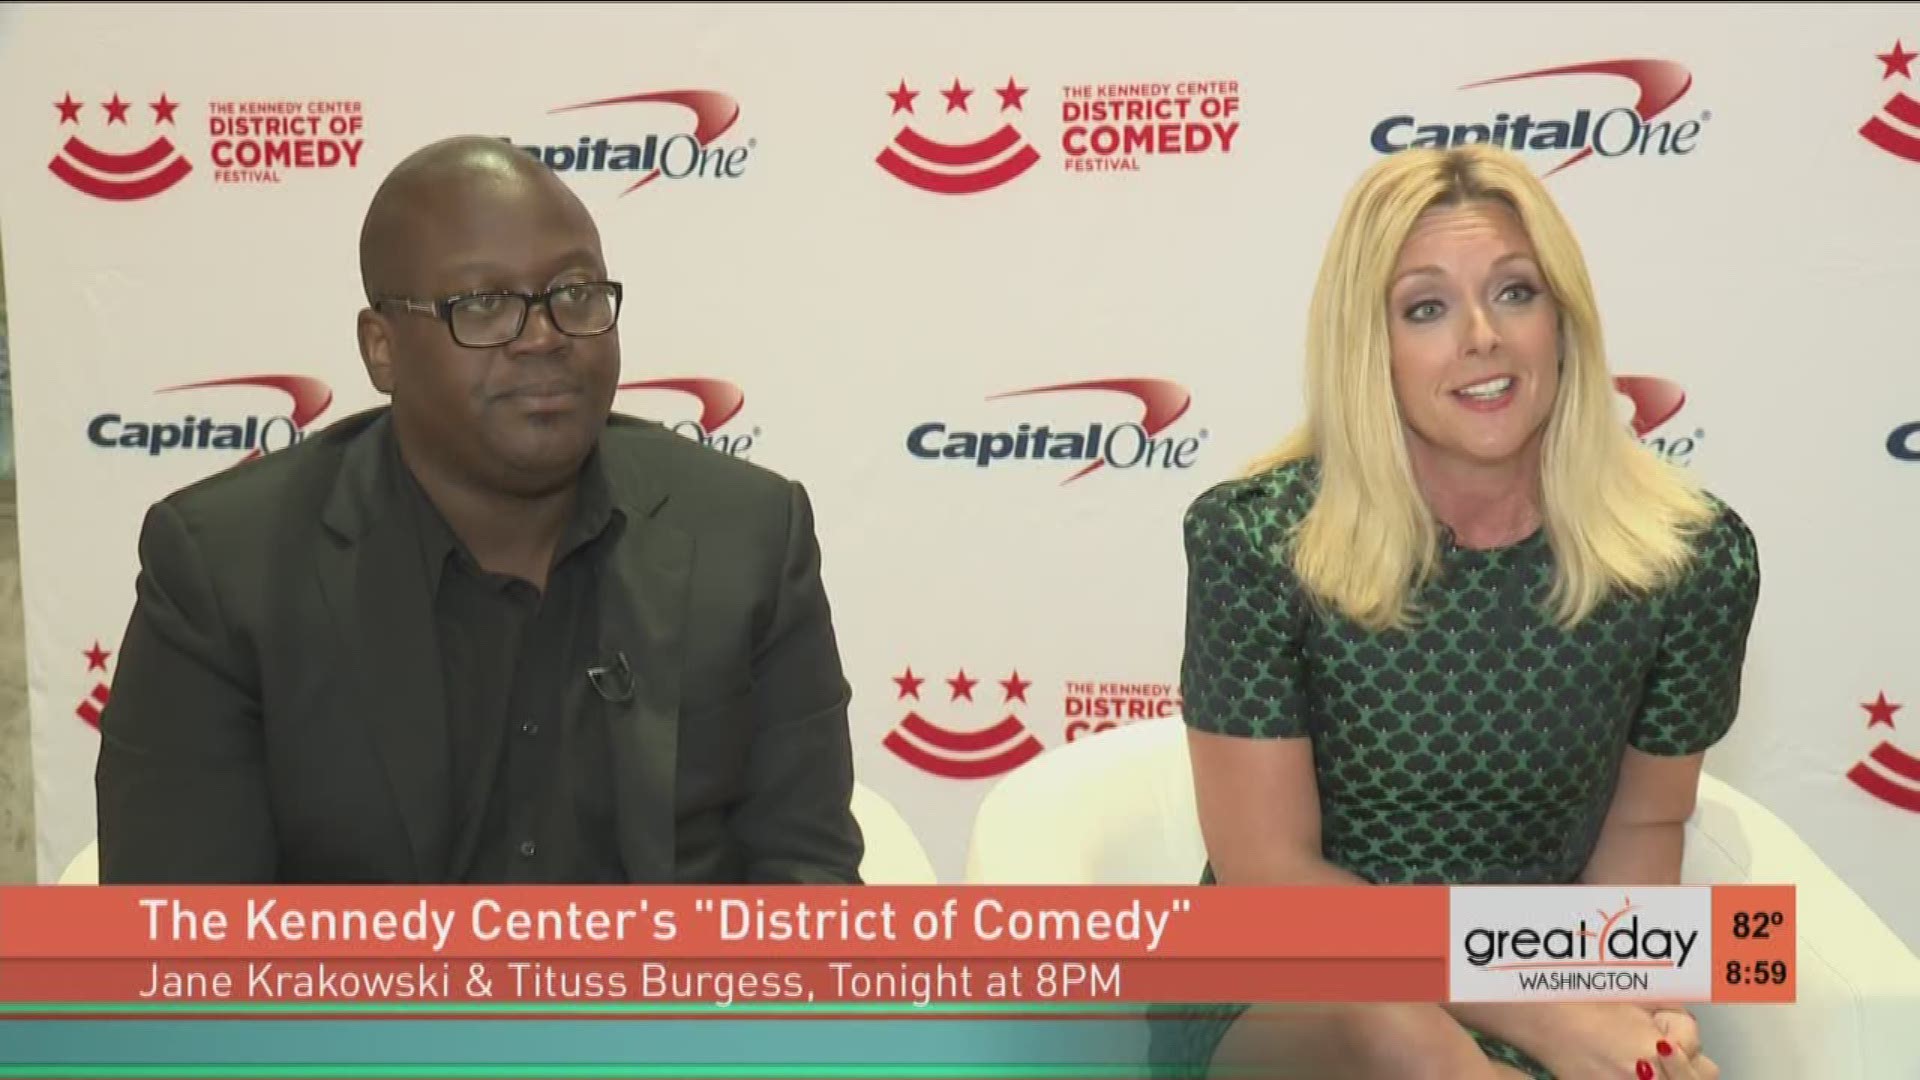 Stars of 30 Rock and Unbreakable Kimmy Schmidt, Jane Krakowski and Tituss Burgess open up the "District of Comedy" festival at the Kennedy Center with a musical comedy act!